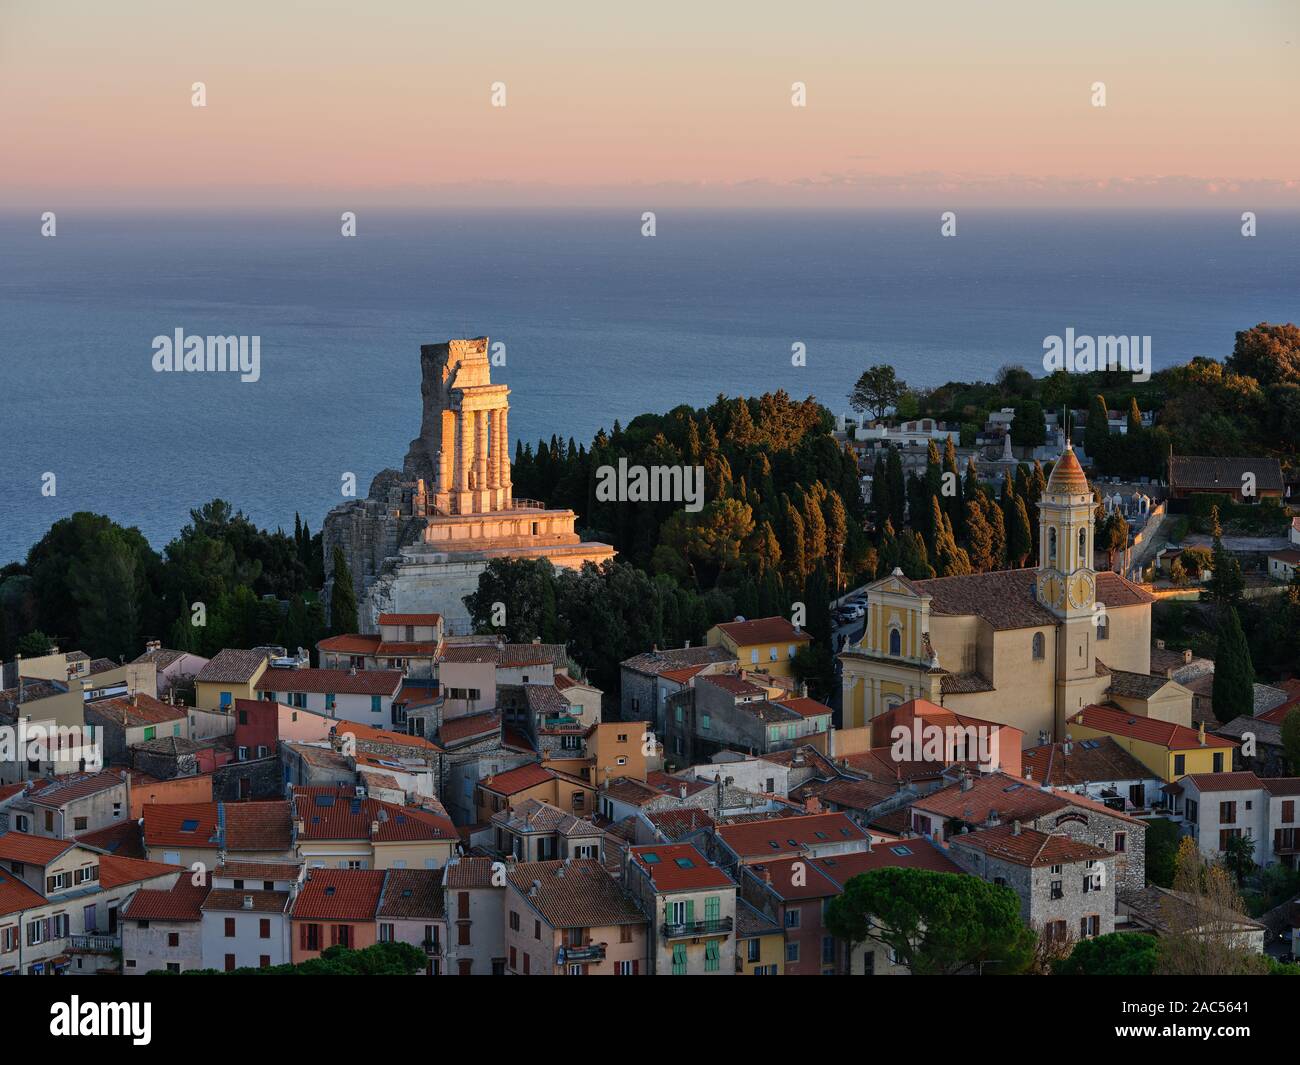 Setting sun selectively lighting a 2000-year-old Roman monument overlooking the Mediterranean Sea. La Turbie, French Riviera, Alpes-Maritimes, France. Stock Photo